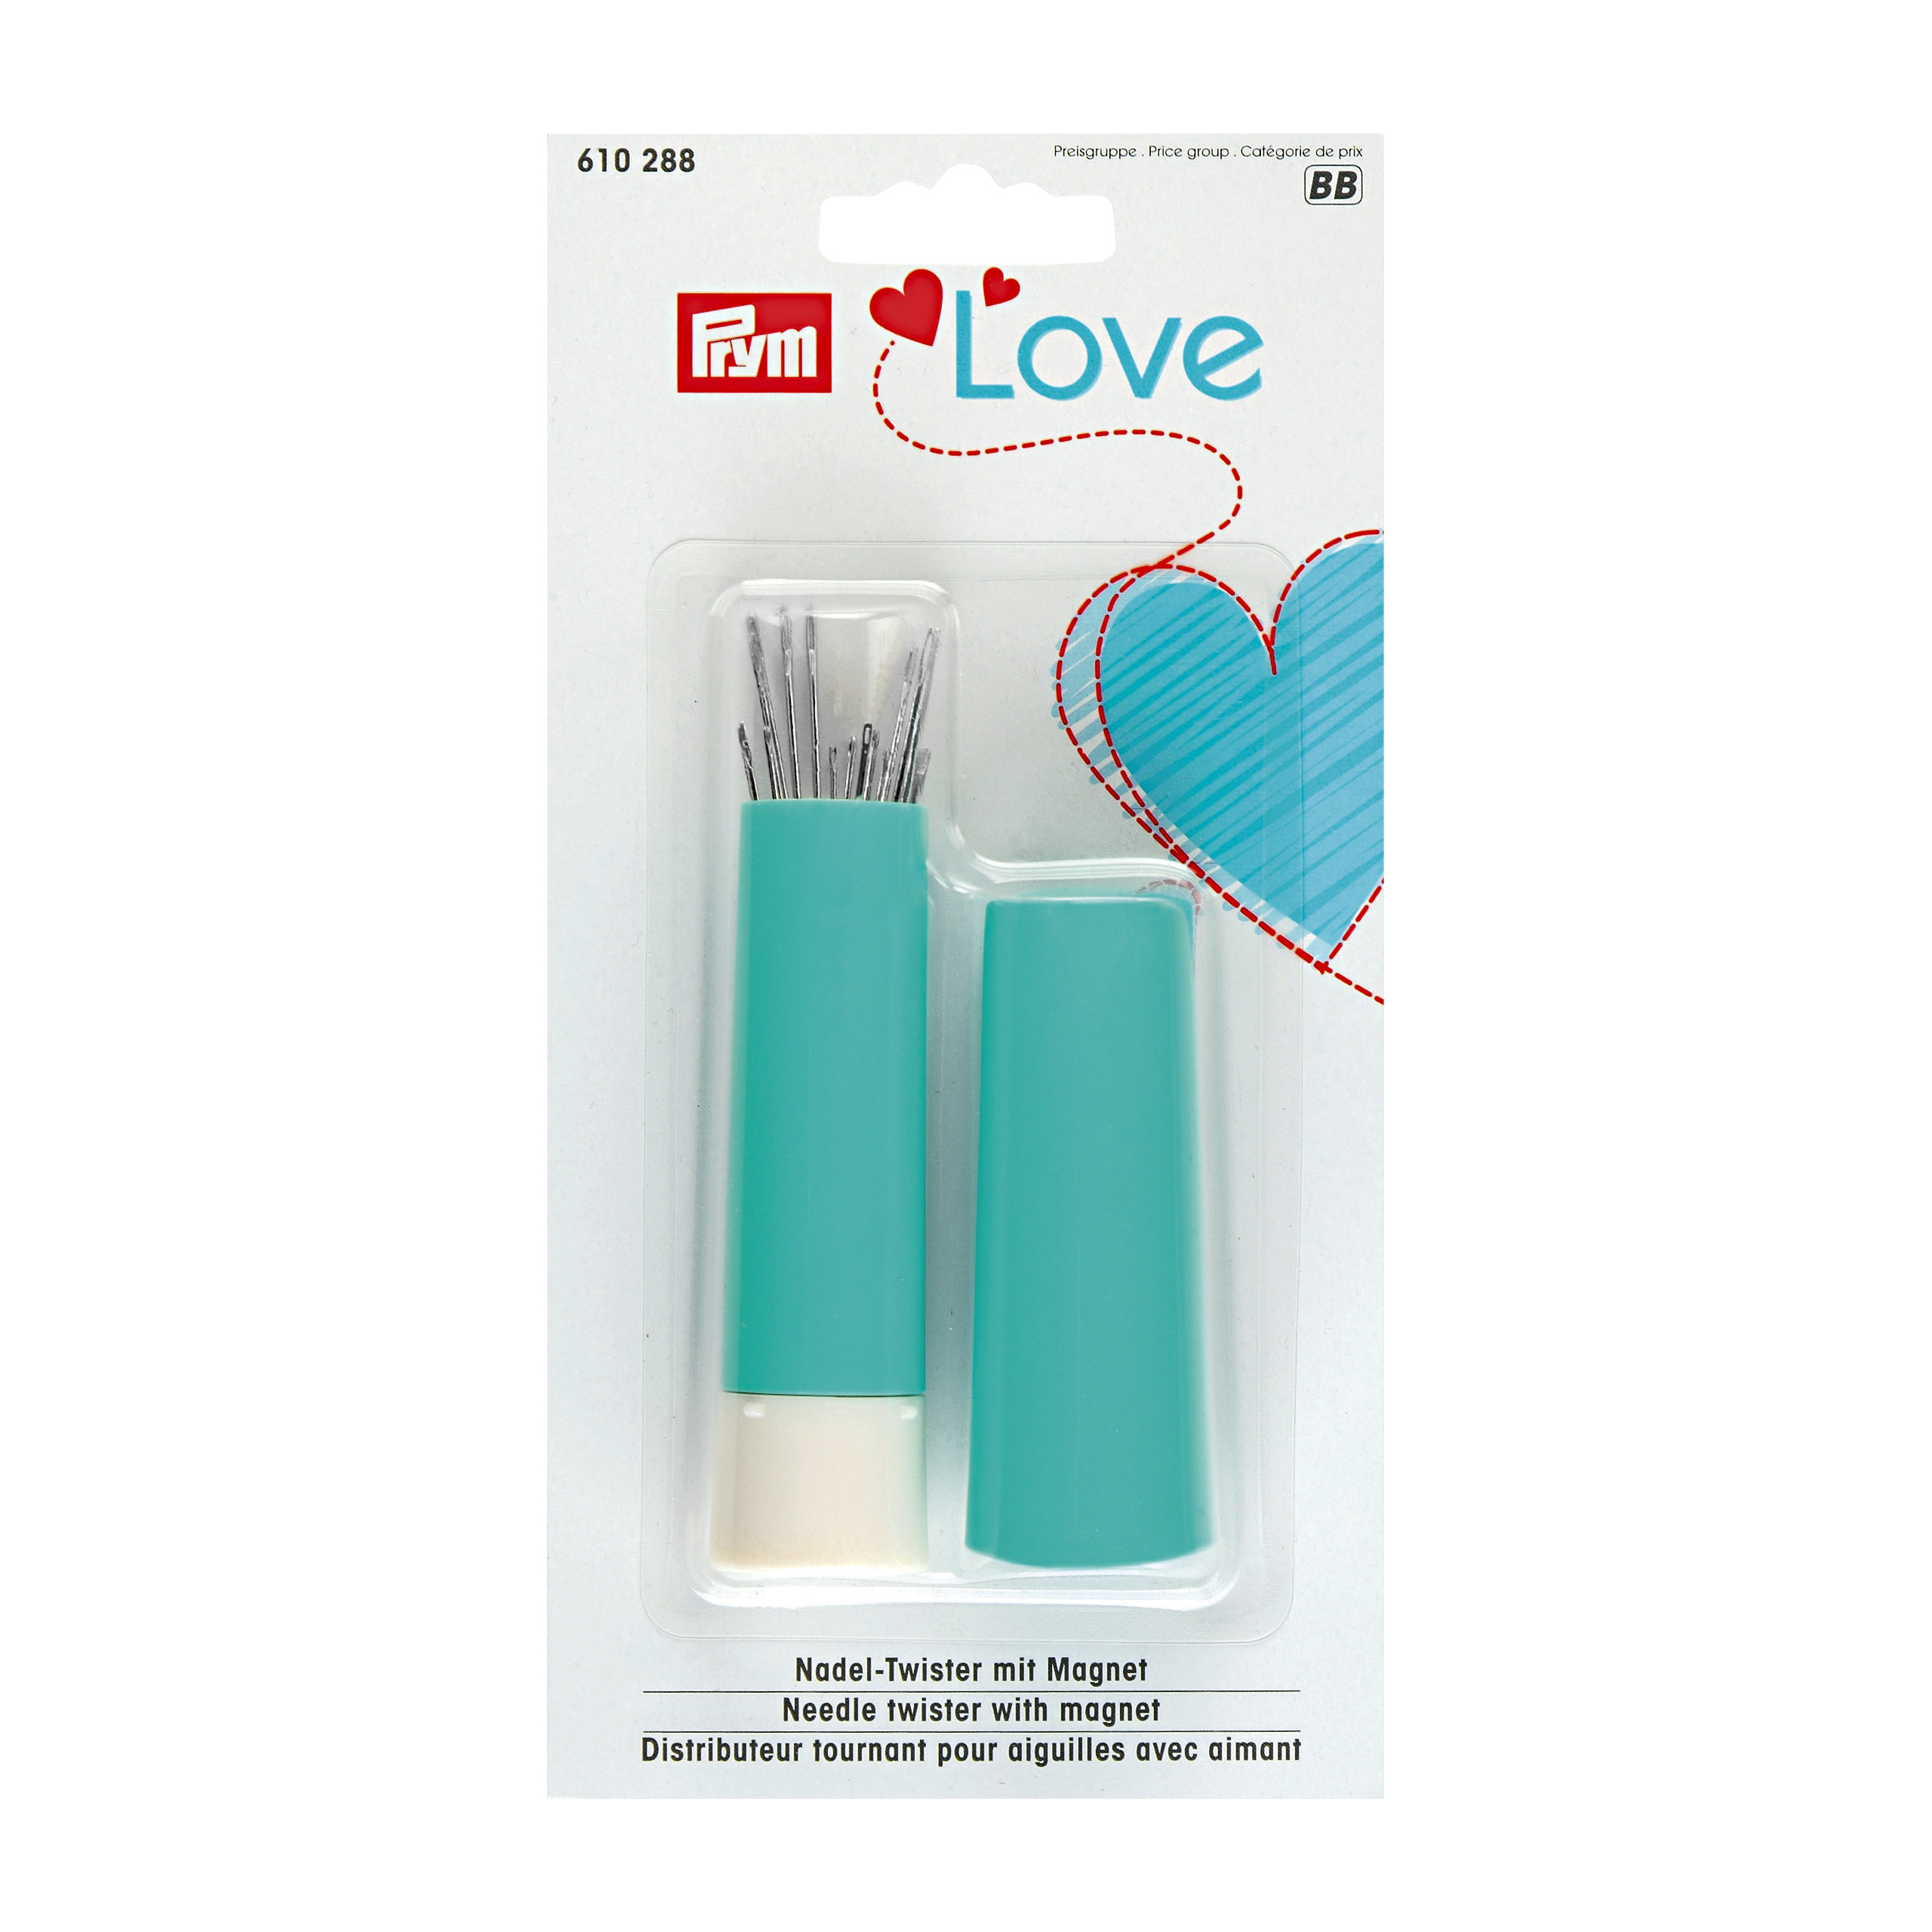 Prym Needle Twister, Prym Love, with sewing and darning needles